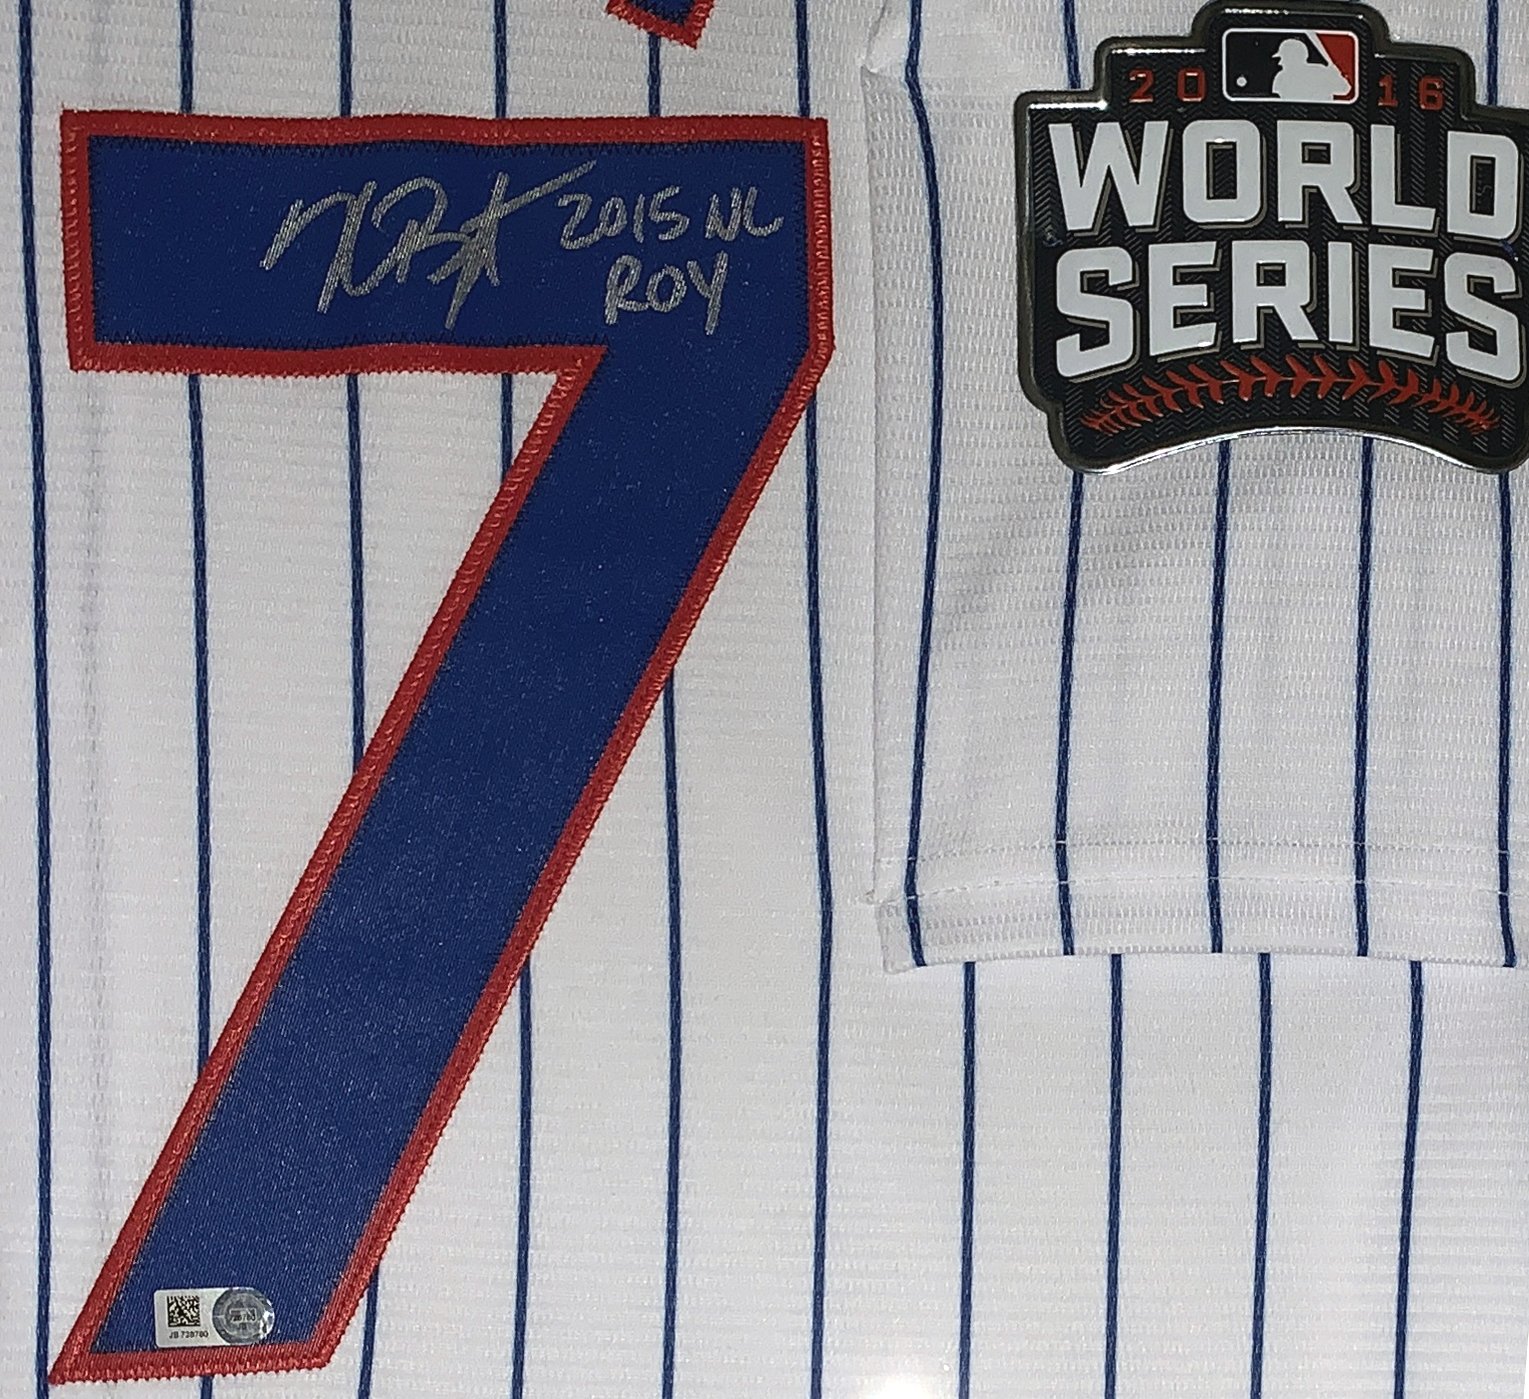 Bleachers Sports Music & Framing — Kris Bryant , Javier Baez , Anthony Rizzo  Autographed 3 Chicago Cubs 2016 World Series Jerseys